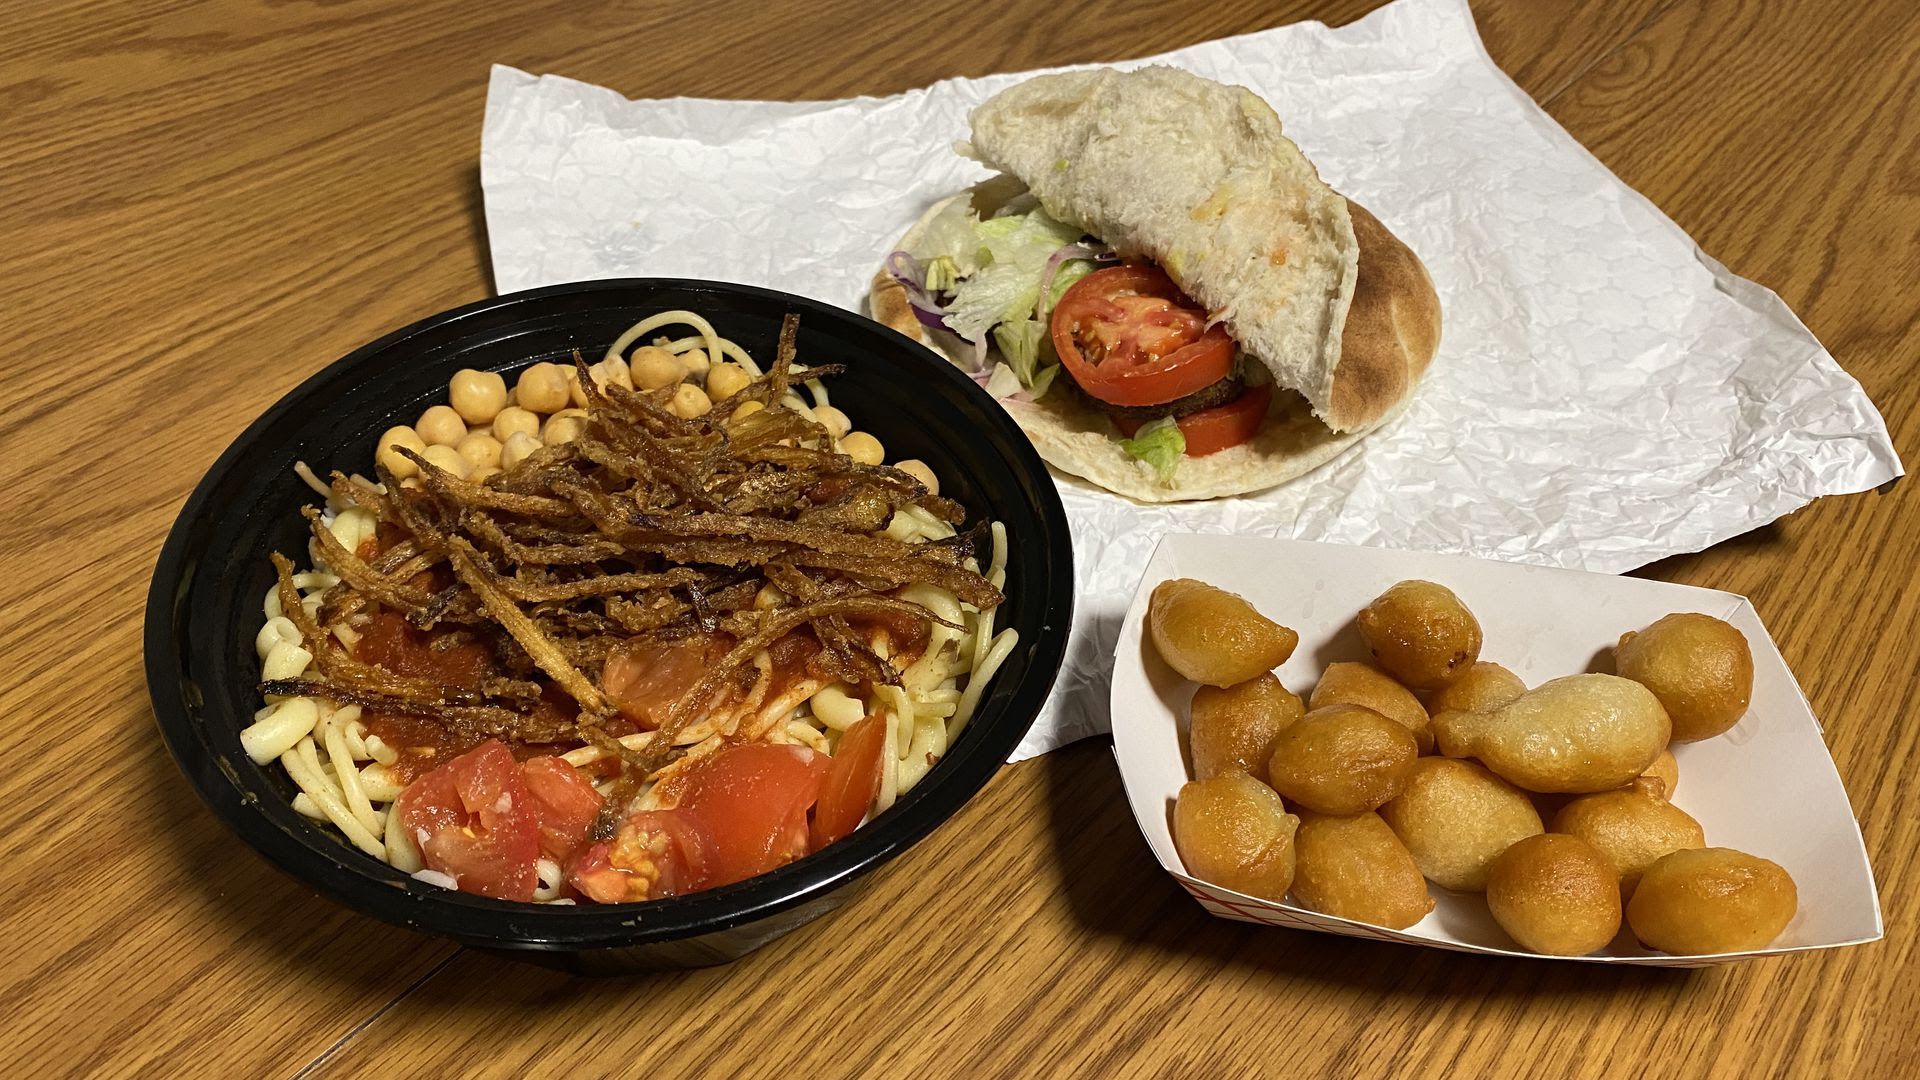 Meals served by the Koshary King food truck include a dish of koshary. 